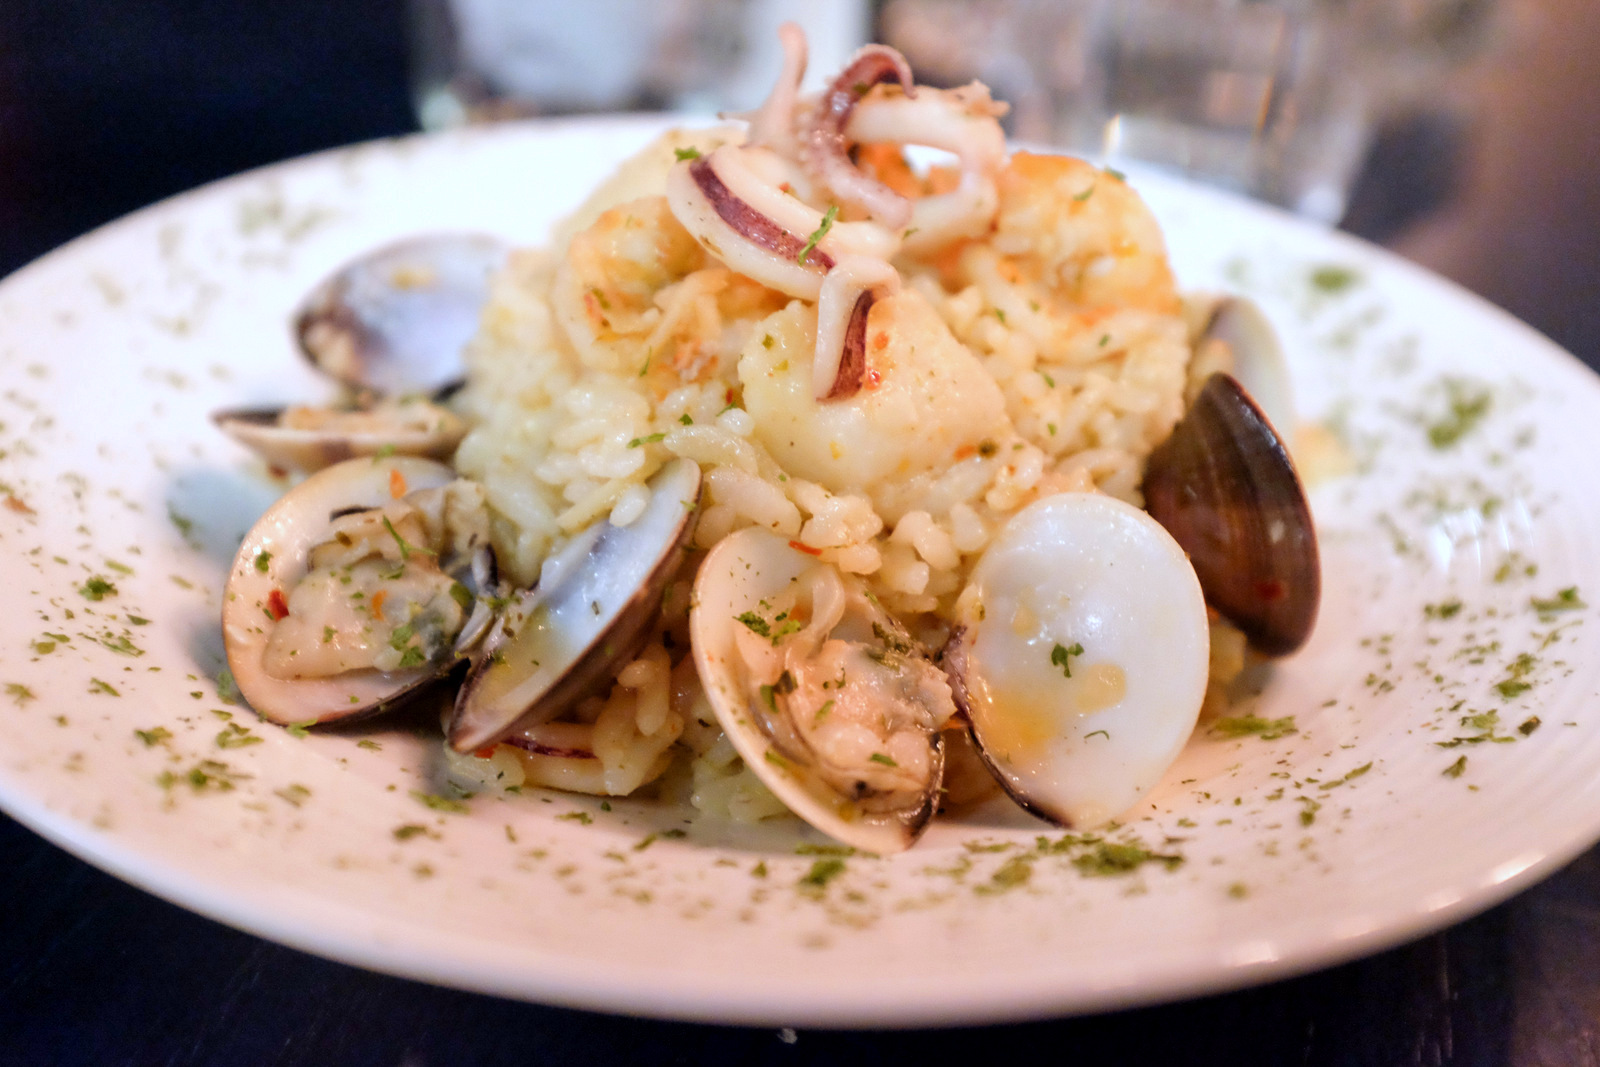 3. Mars - seafood risotto